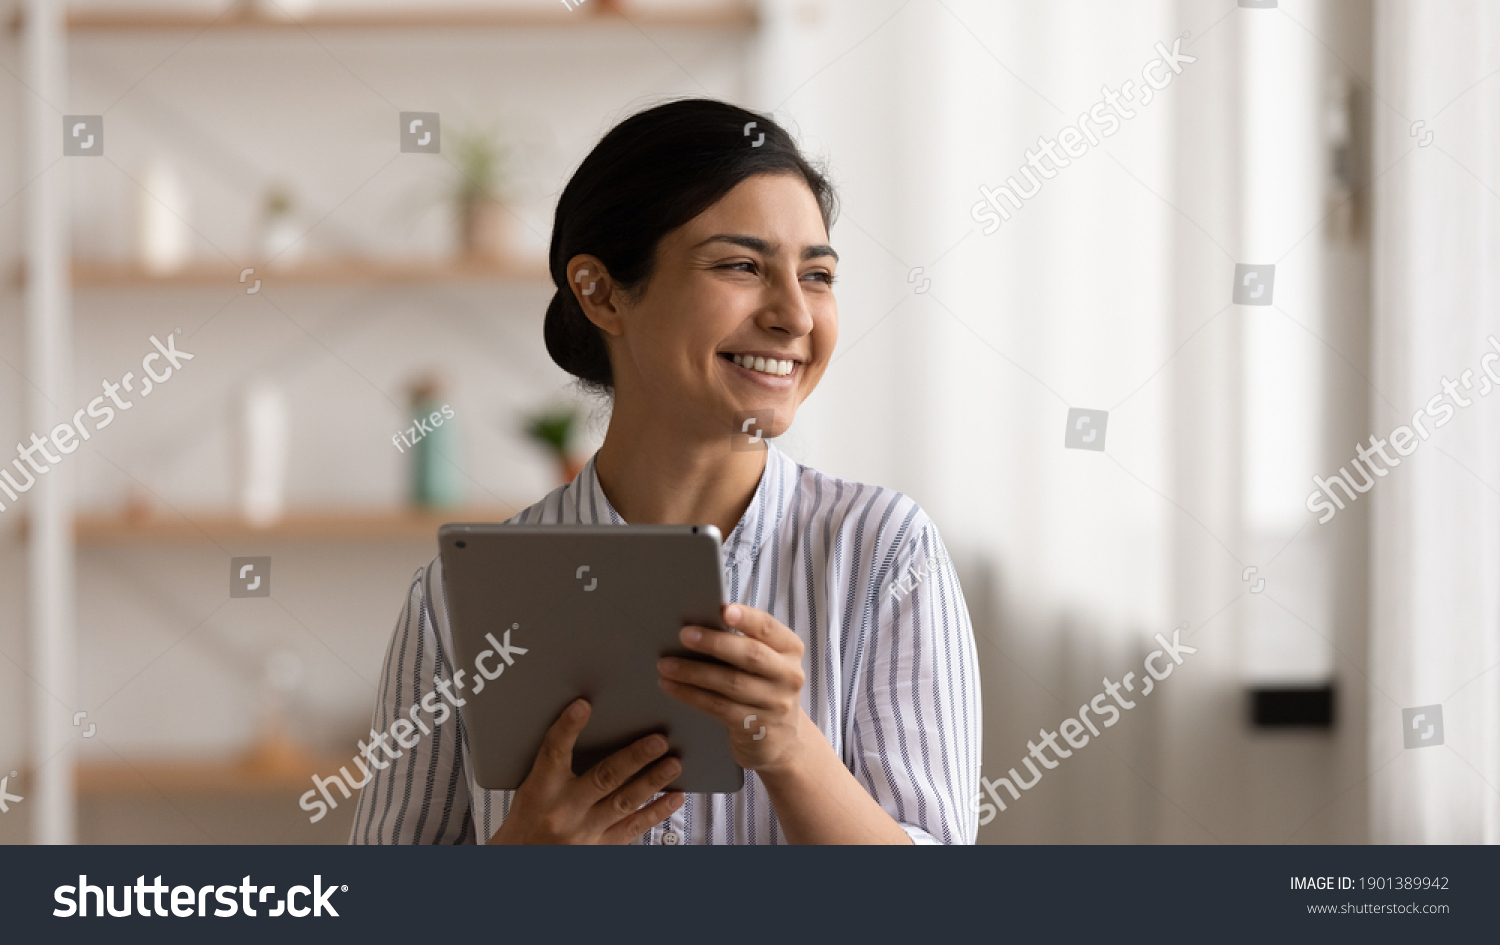 Full of dreams. Smiling mixed race lady web shop customer hold pad pc look aside choose goods plan purchases. Positive indian female relax at home with digital tablet enjoy modern device possibilities #1901389942